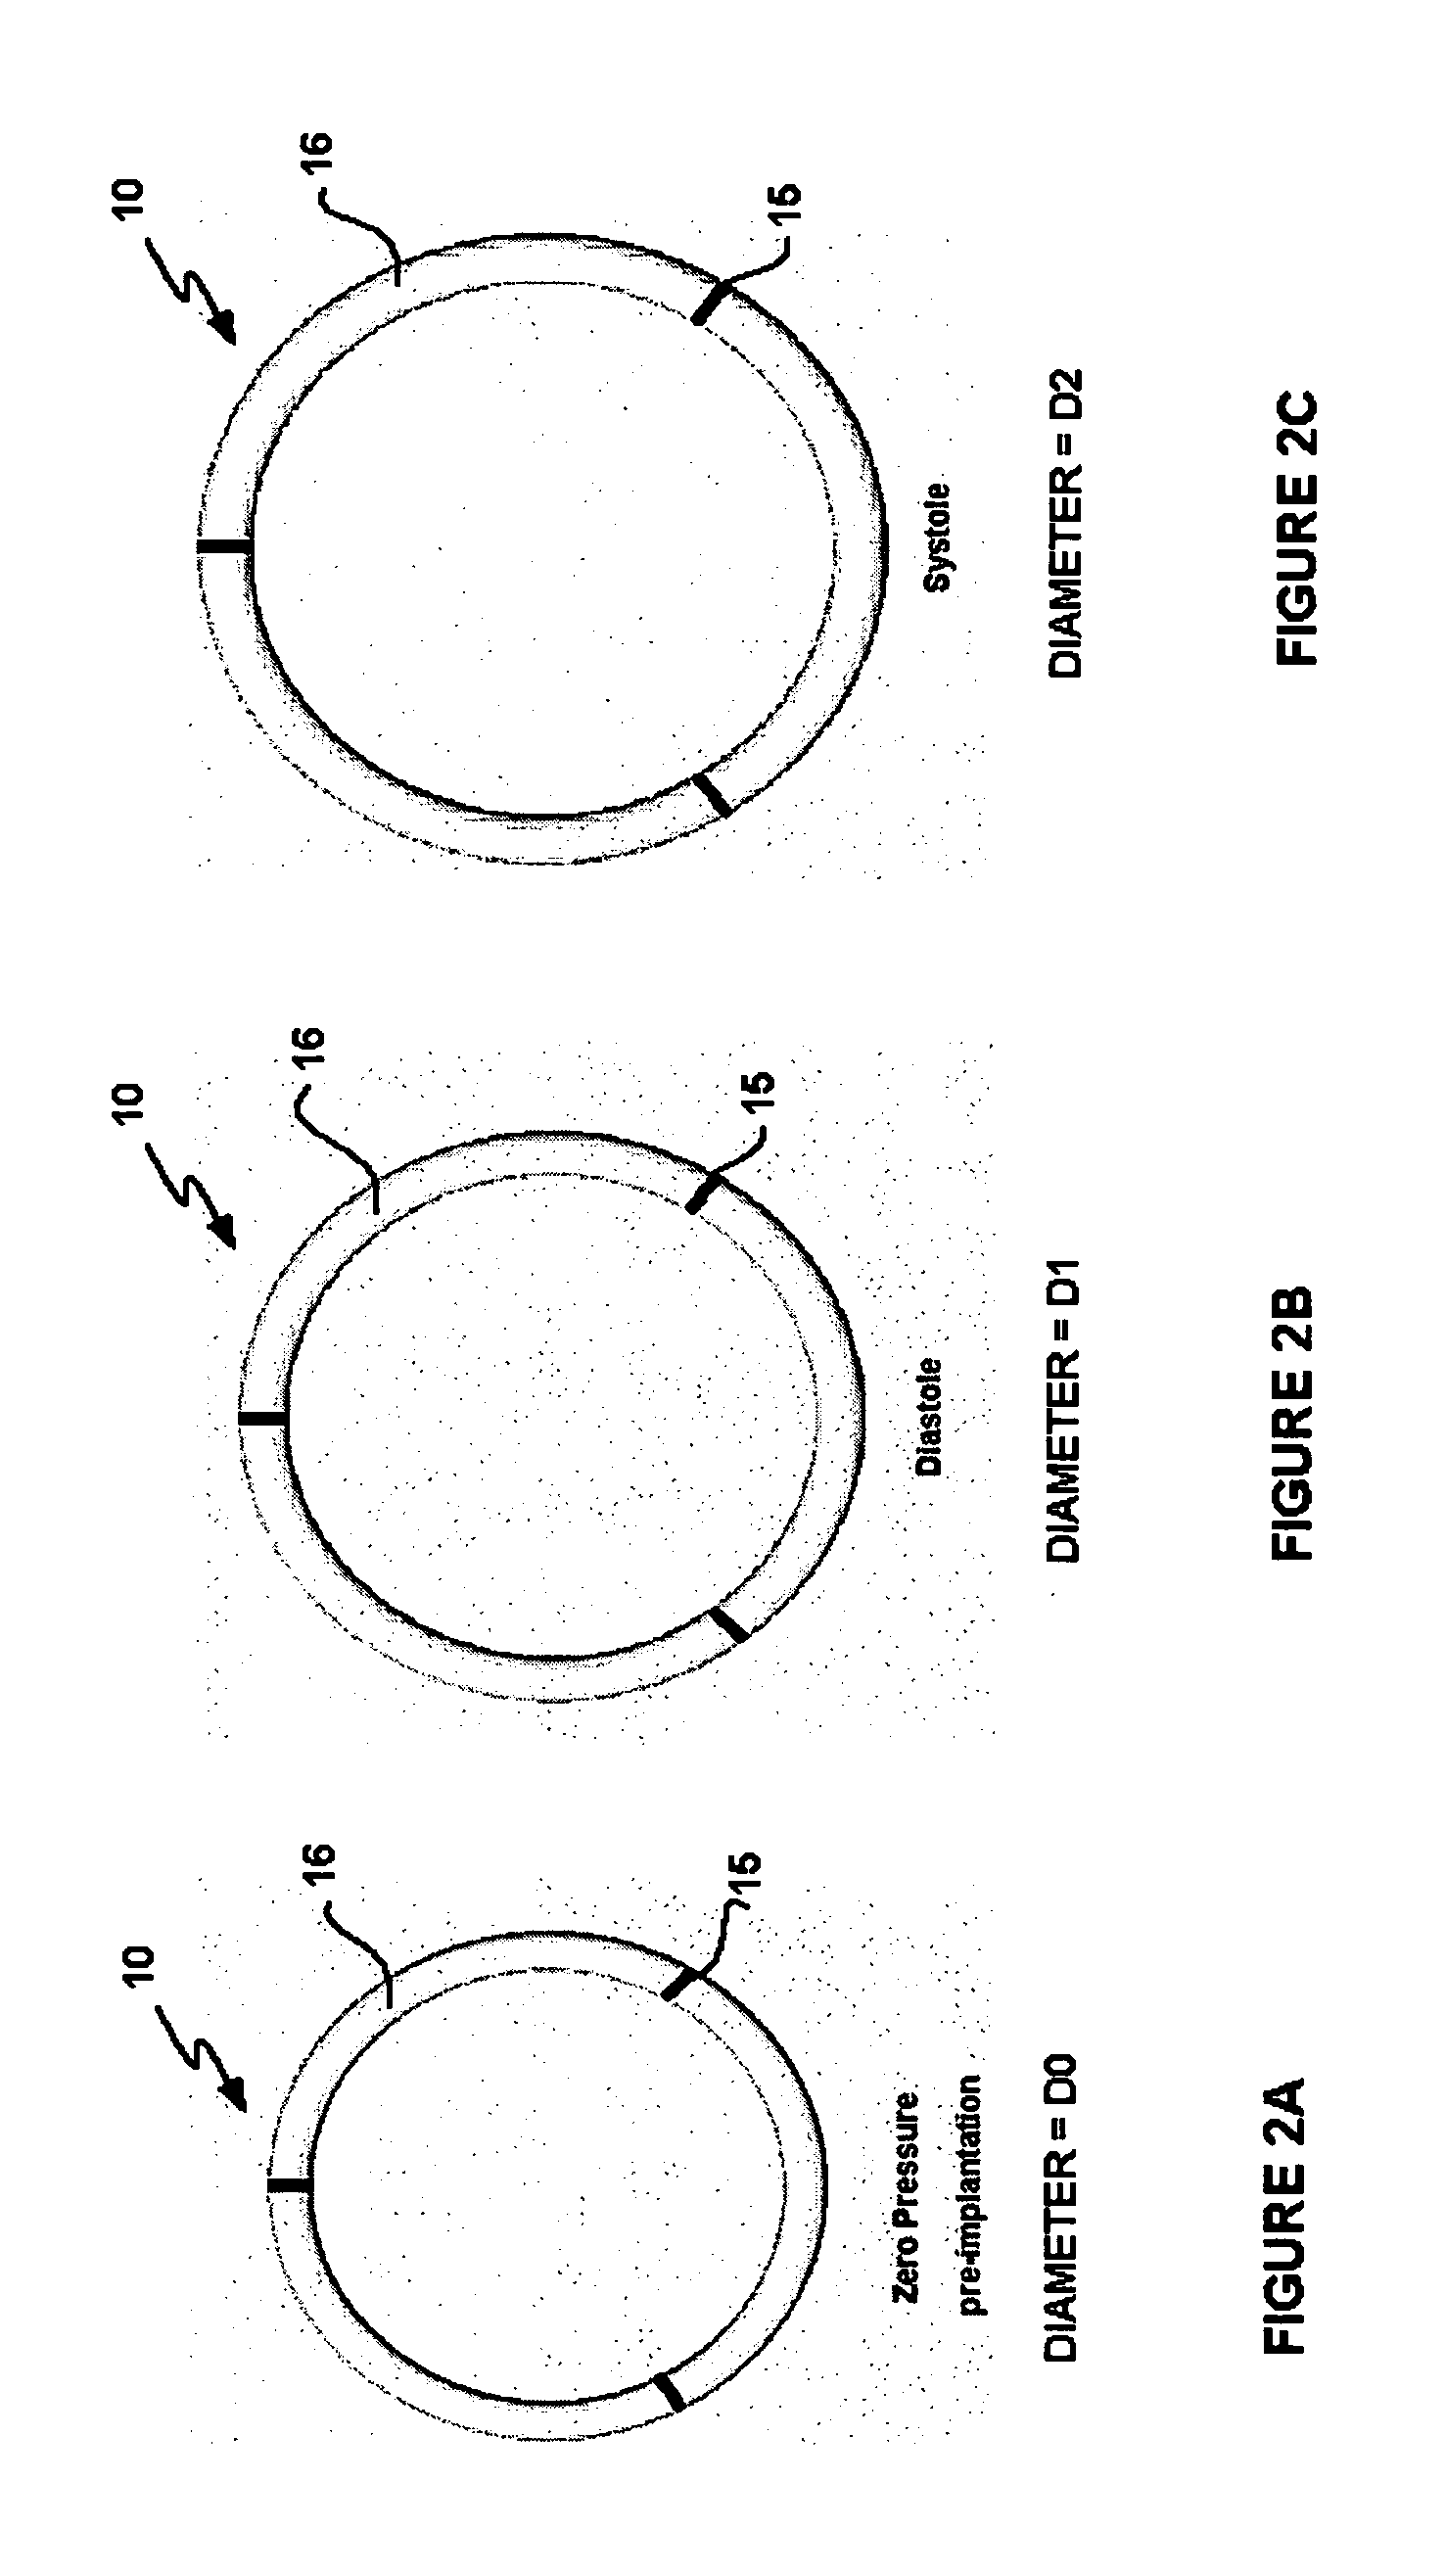 Expandable annuloplasty ring and associated ring holder